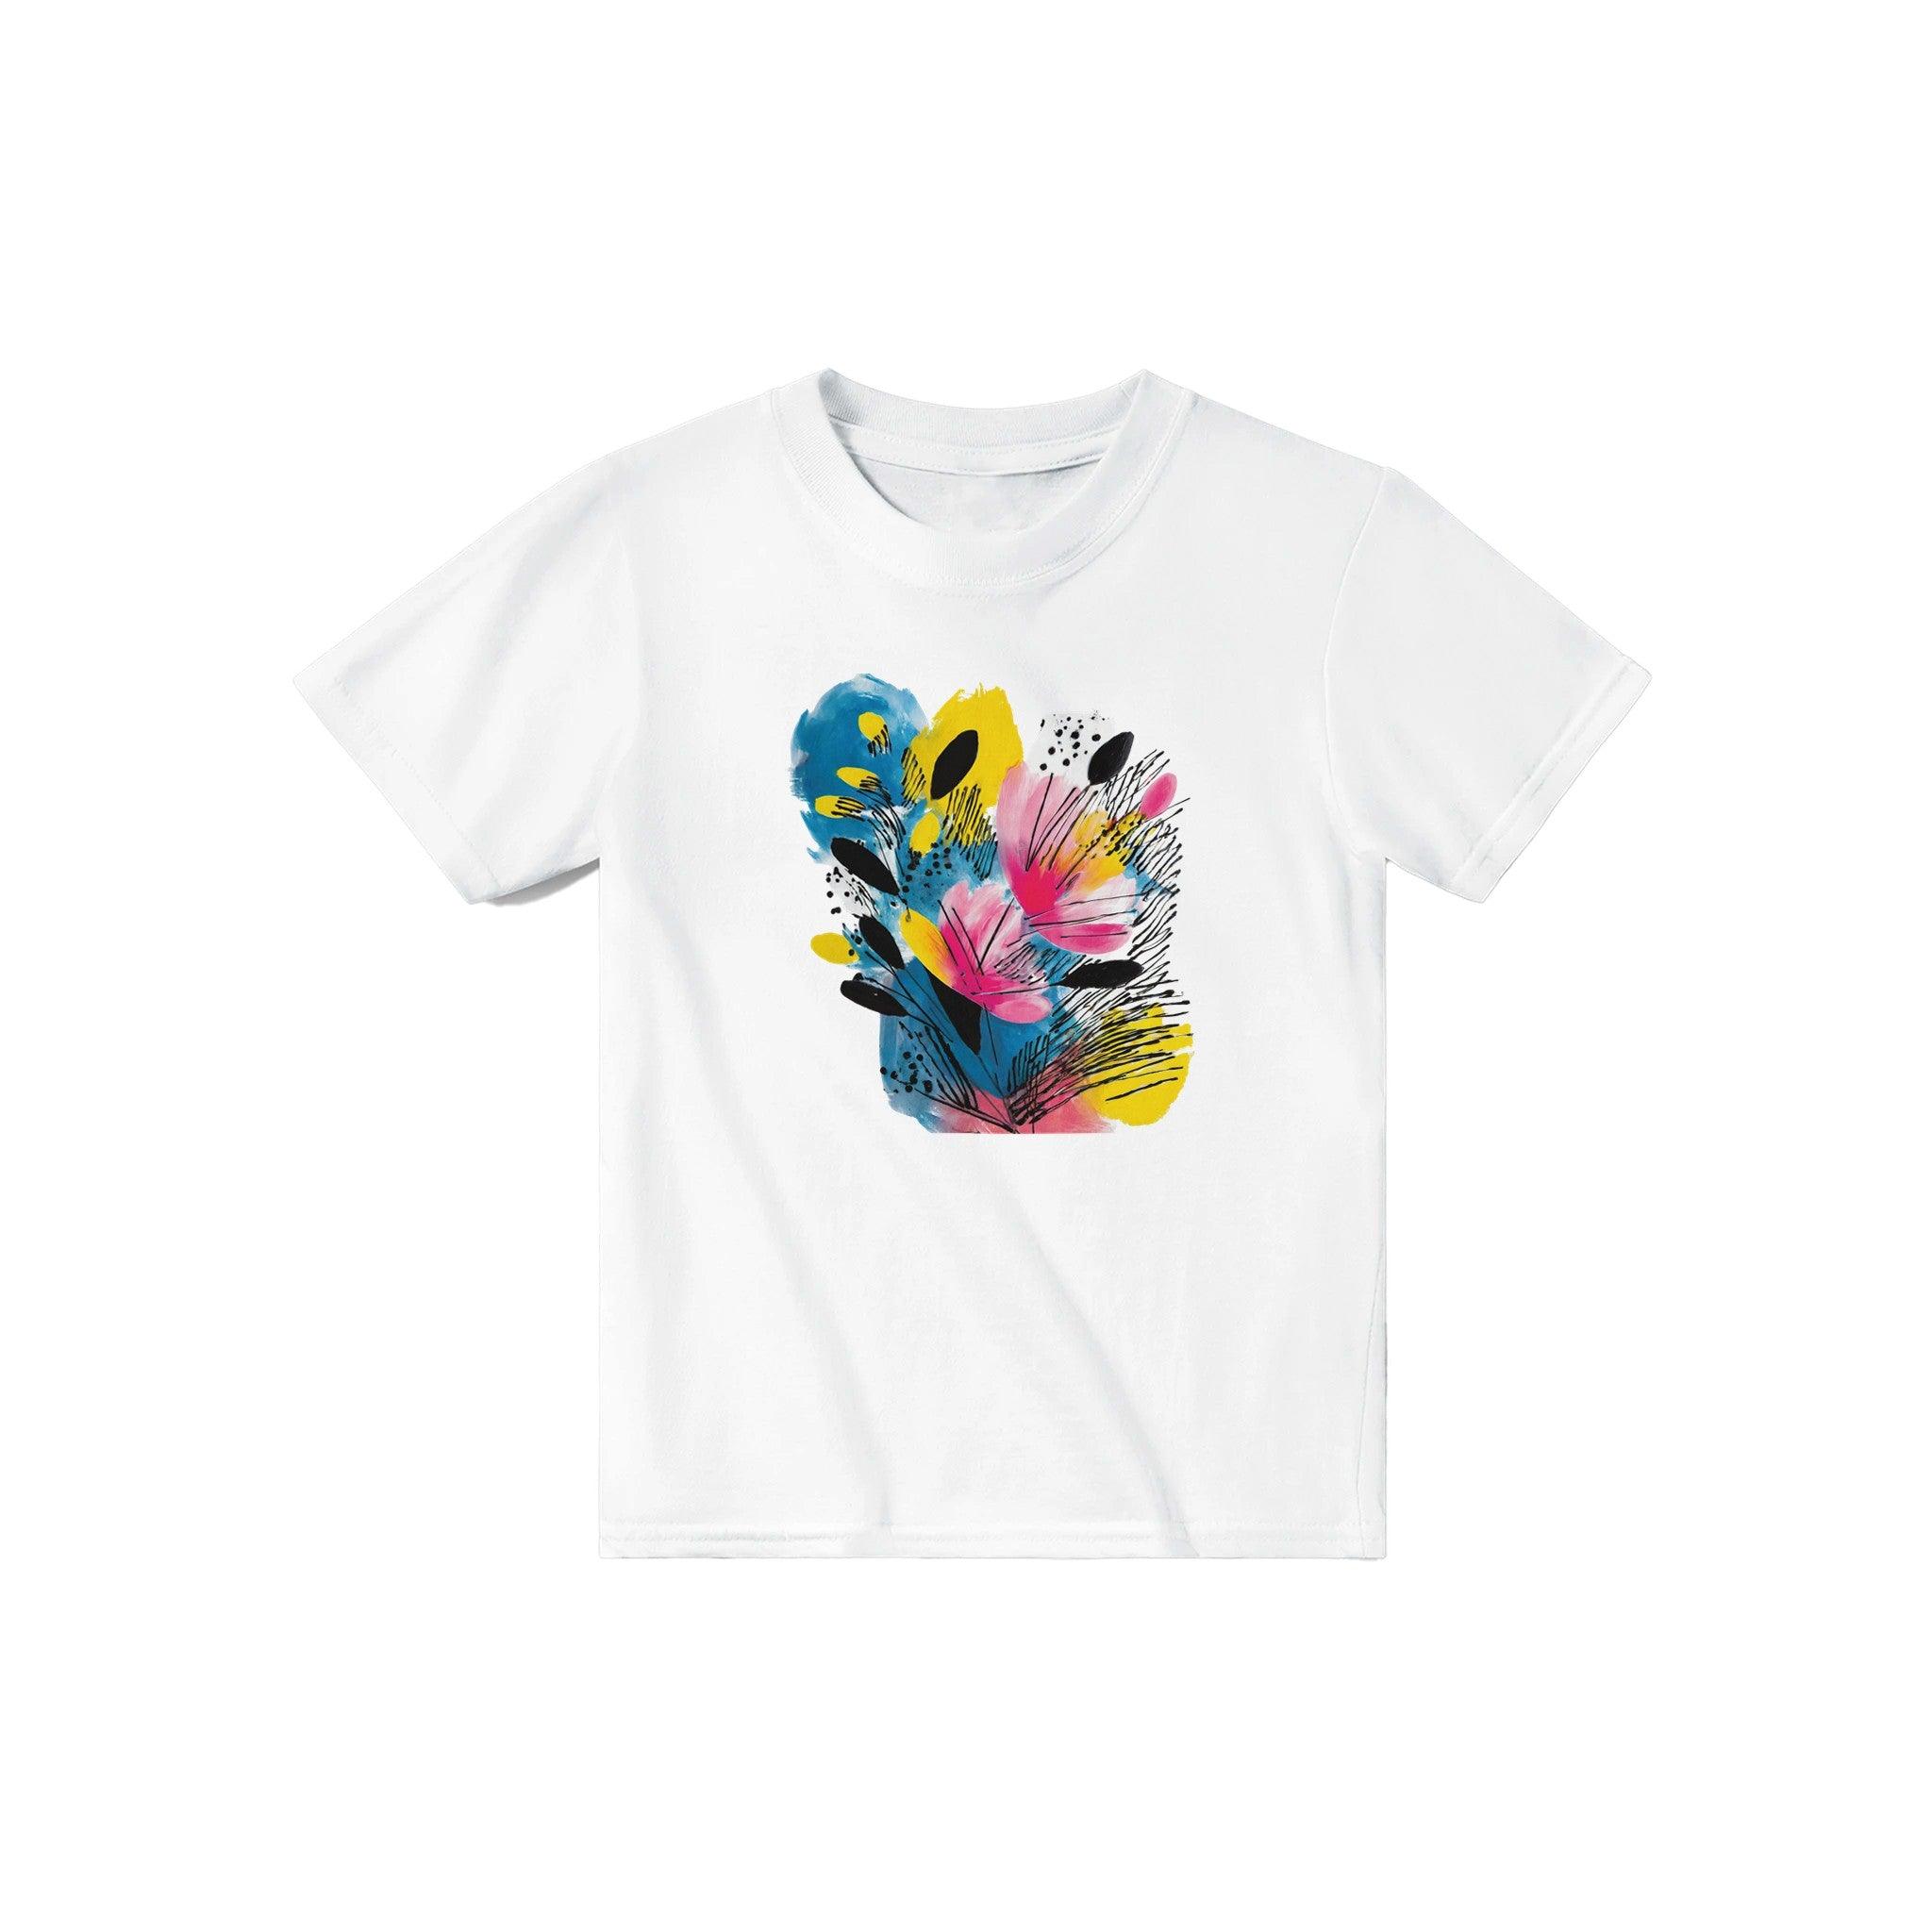 'Floral Paint' Baby Tee - POMA